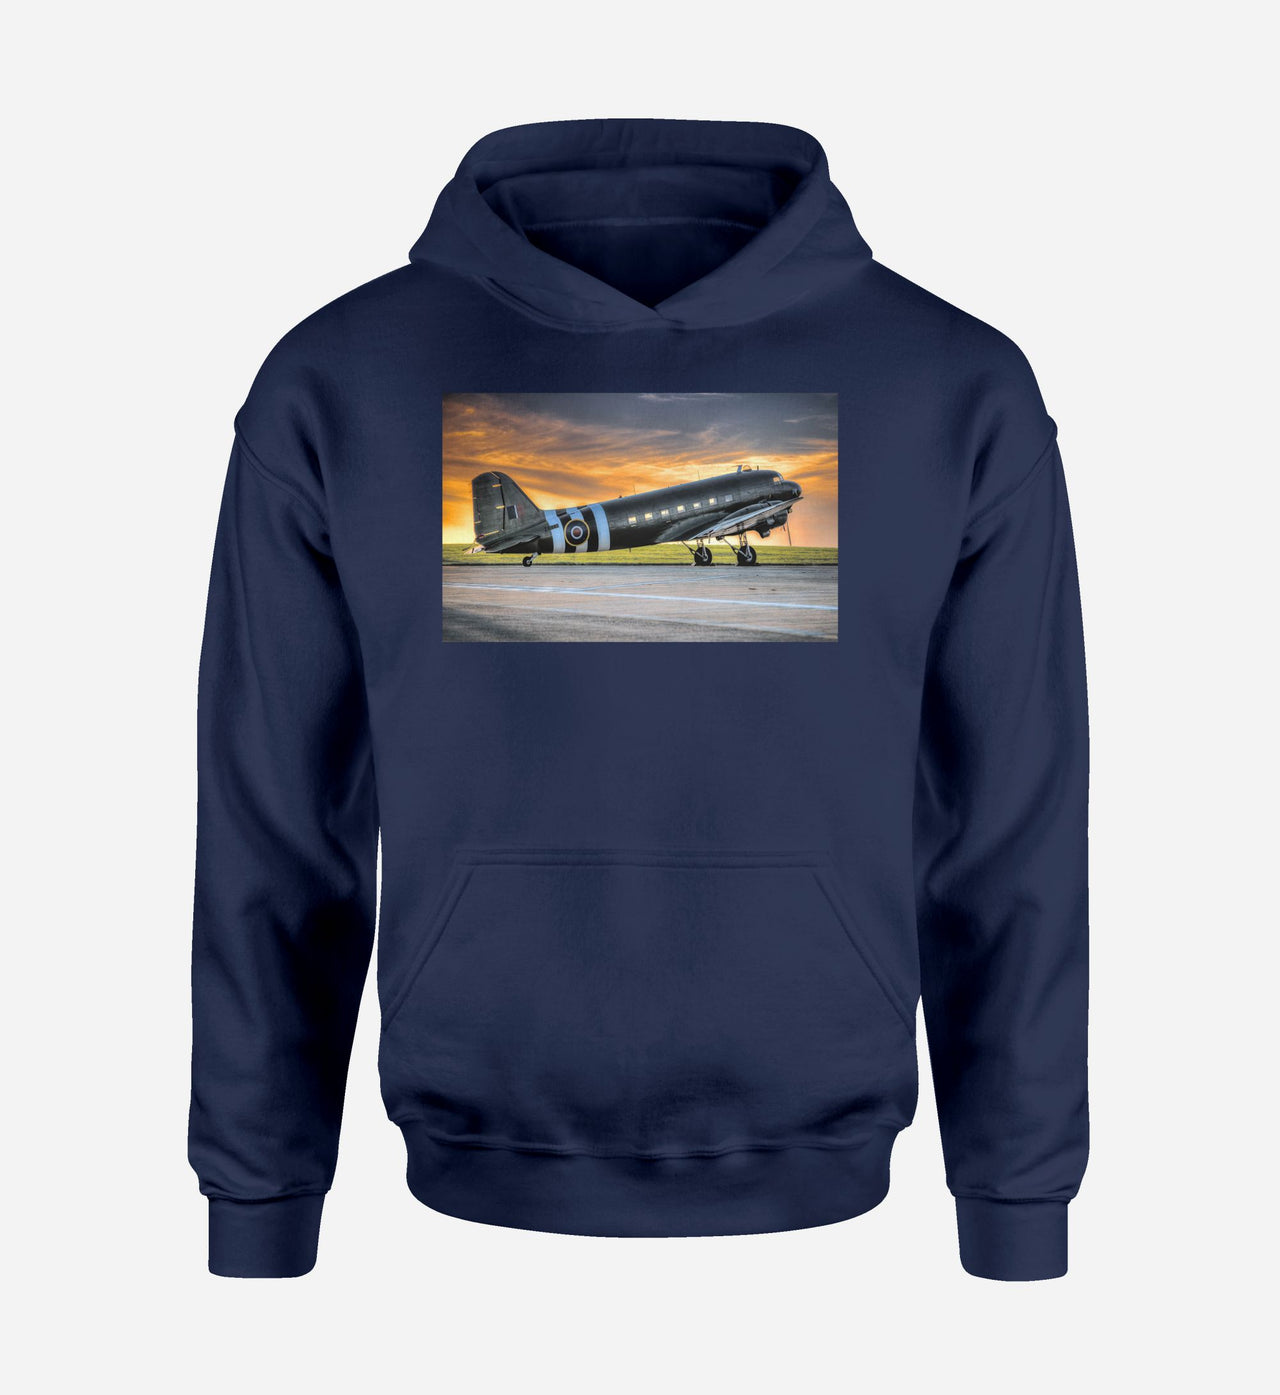 Old Airplane Parked During Sunset Designed Hoodies